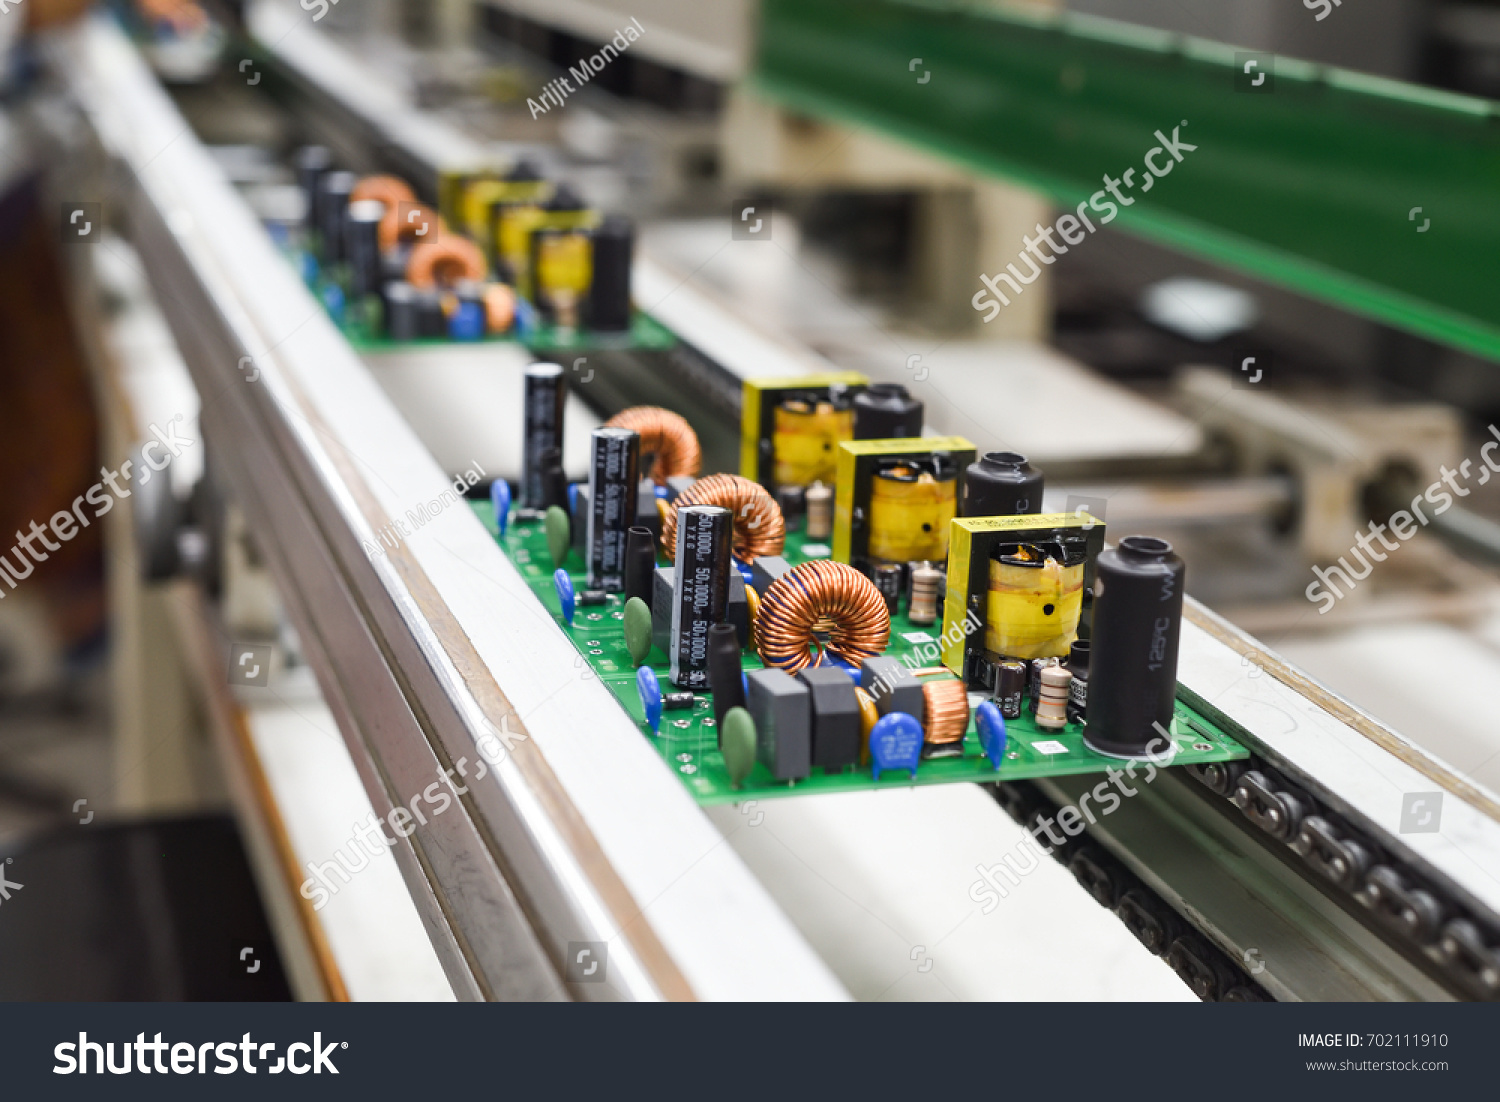 Manual insertion of electronic components on printing circuit board assembly before wave soldering. The image taken in a electronic production plat on a conveyor belt.   #702111910